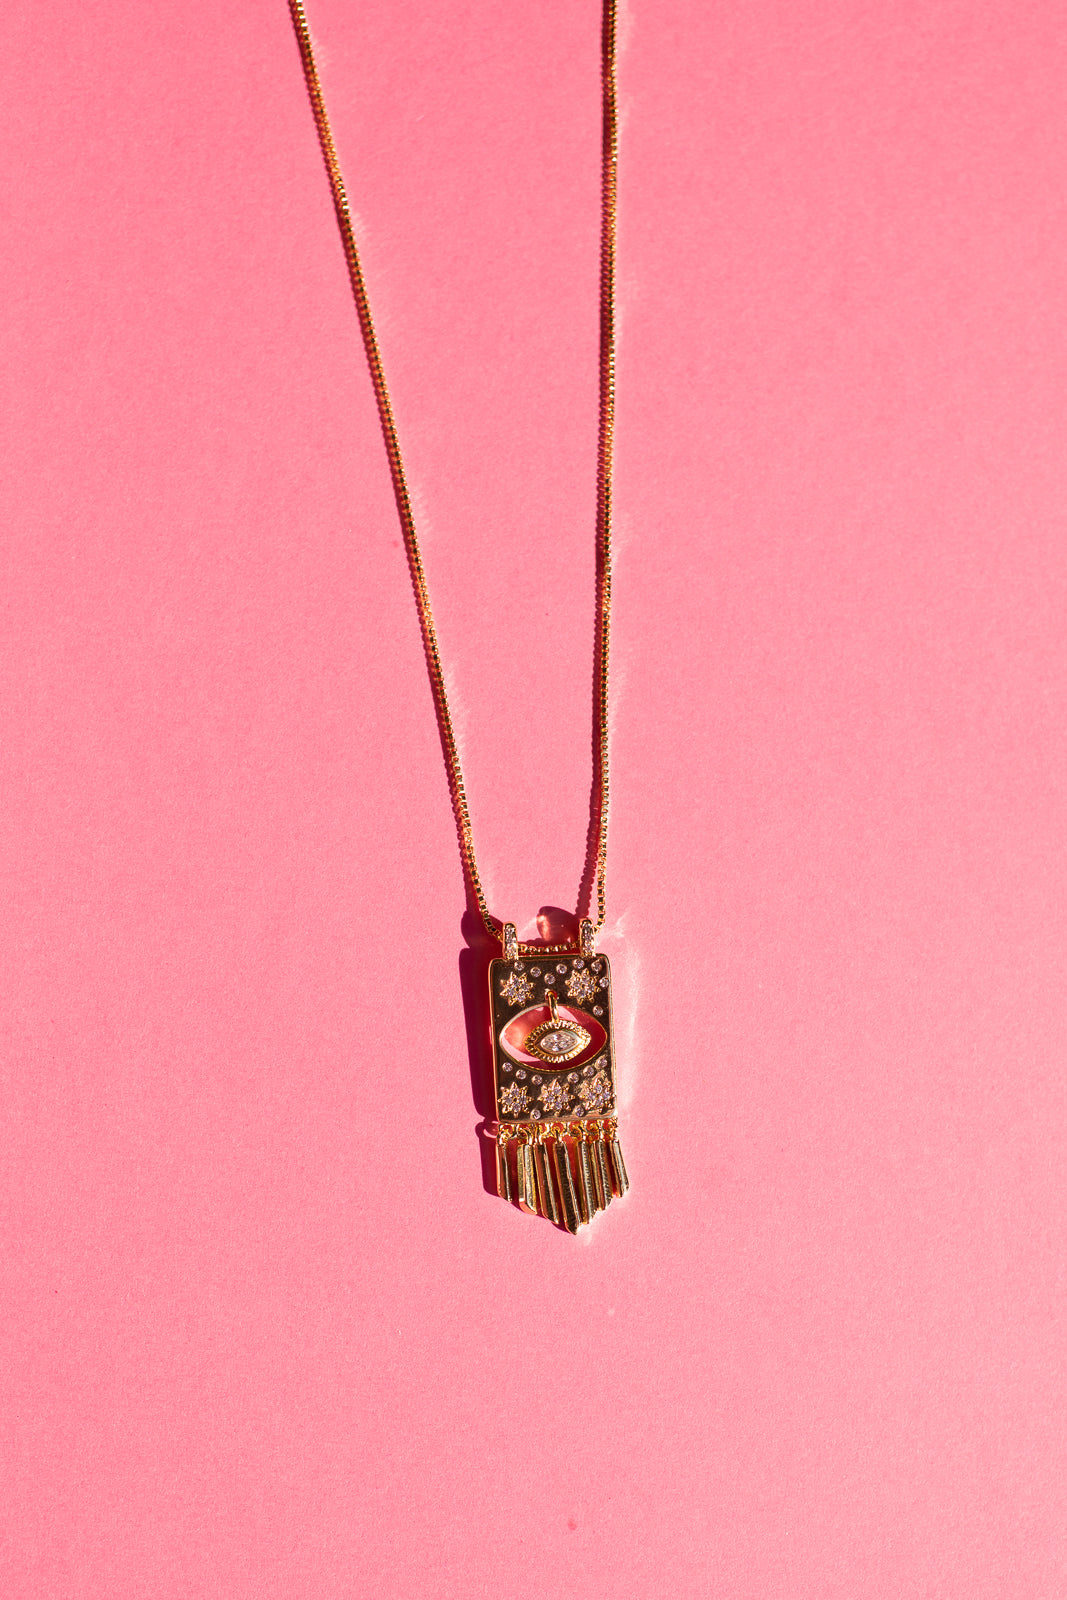 The Third Eye Fringed Pendant Necklace *GOLD FILLED*